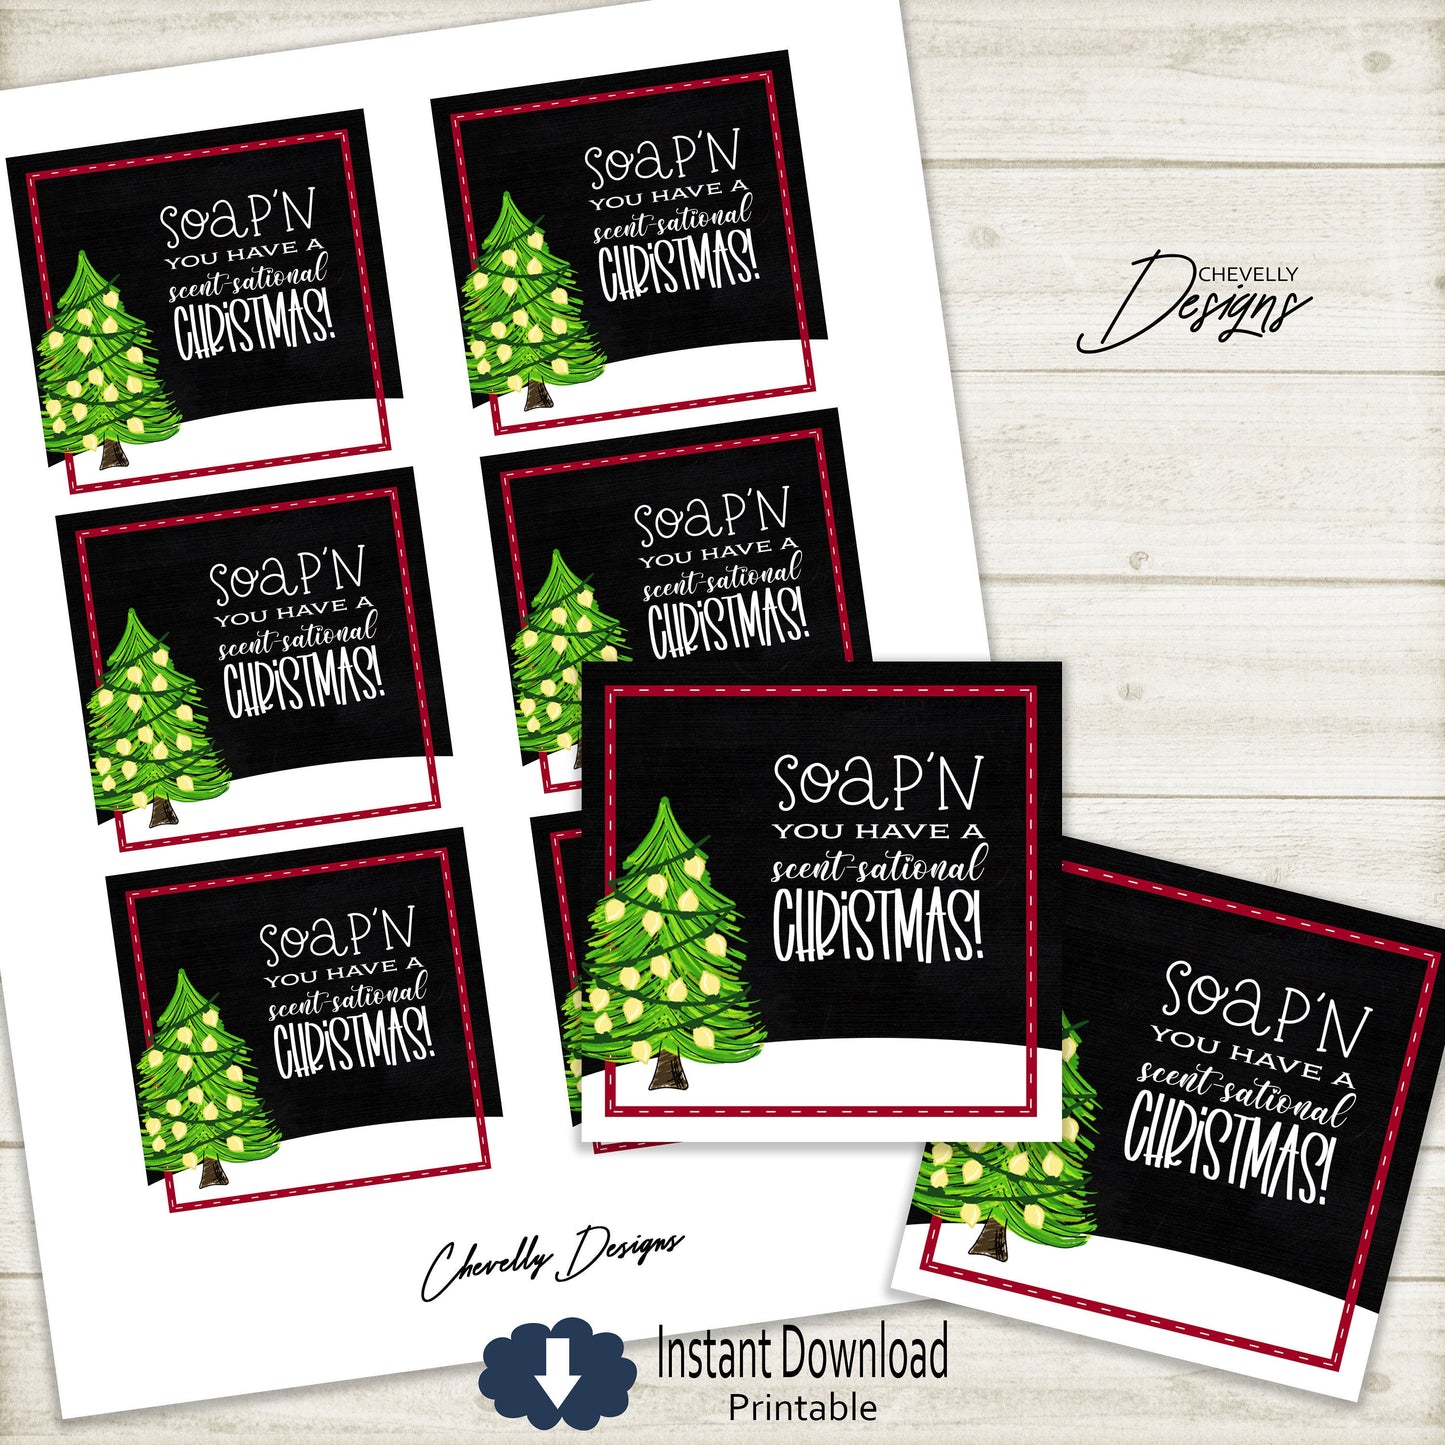 Printable Soap'n You Have a Scent-sational Christmas Gift Tags >>>Instant Digital Download<<<